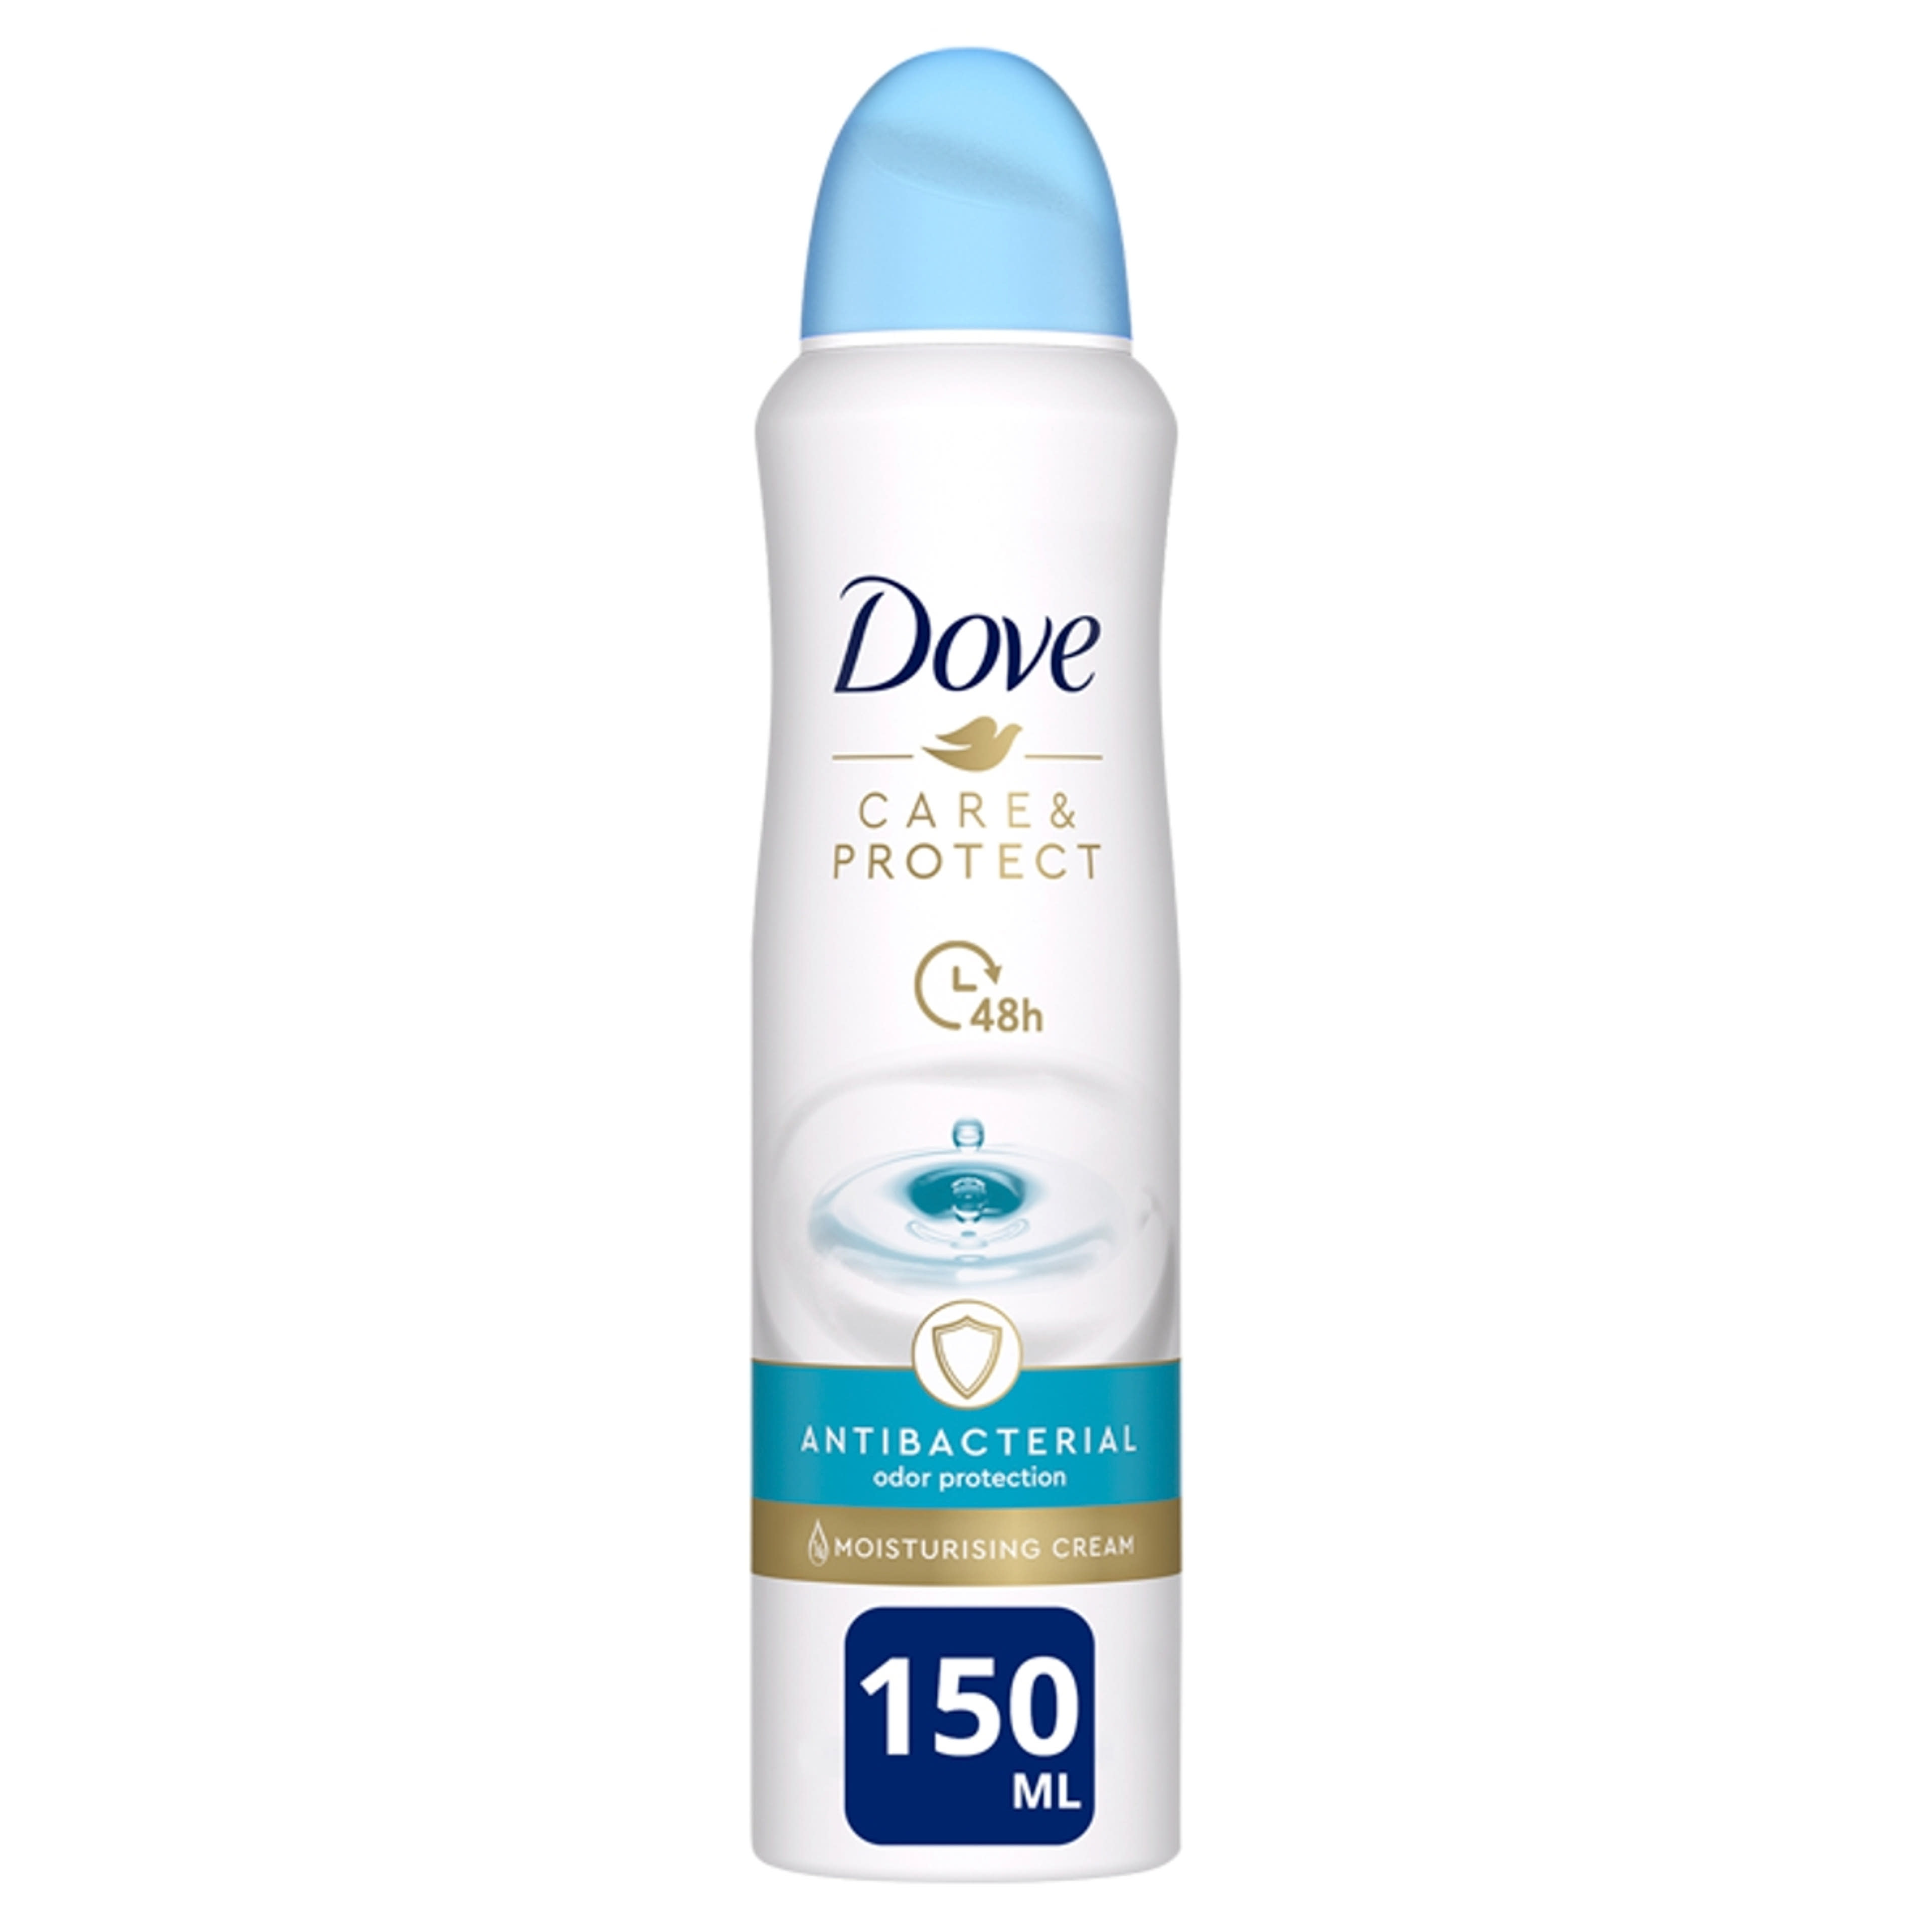 Dove Care&Protect deo - 150 ml-2